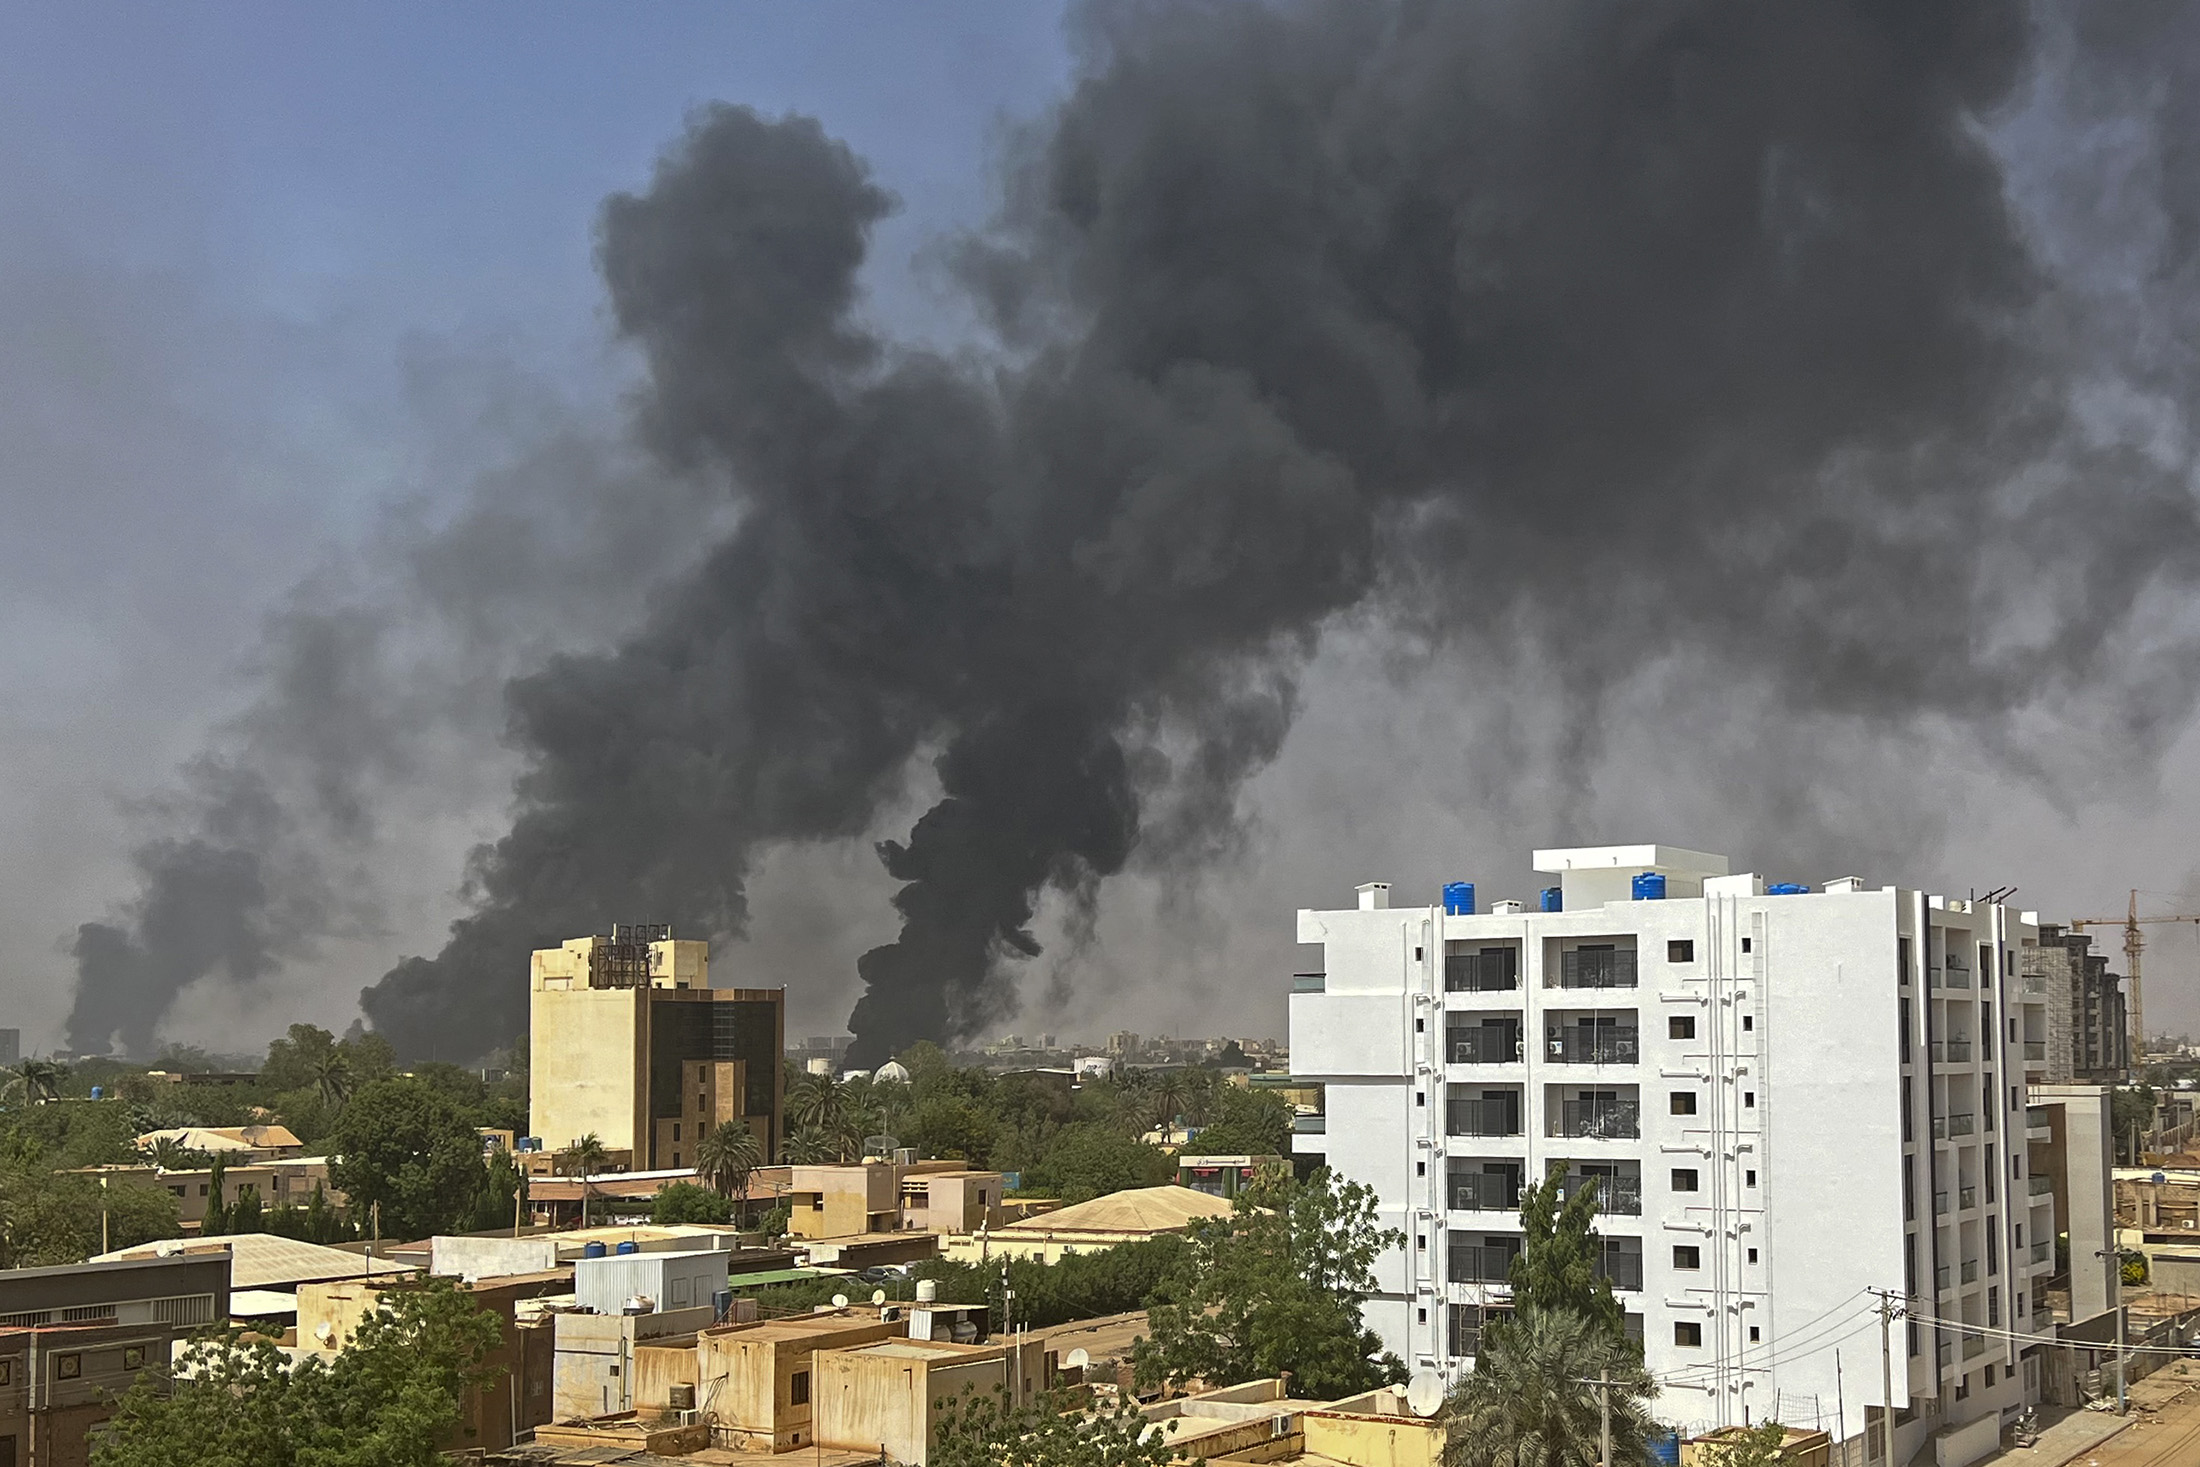 Smoke billows above residential buildings in Khartoum on April 16, 2023, as fighting in Sudan raged for a second day in battles between rival generals. - Violence erupted early on April 15 after weeks of deepening tensions between army chief Abdel Fattah al-Burhan and his deputy, Mohamed Hamdan Daglo, commander of the heavily-armed paramilitary Rapid Support Forces (RSF), with each accusing the other of starting the fight. (Photo by AFP) (Photo by -/AFP via Getty Images)